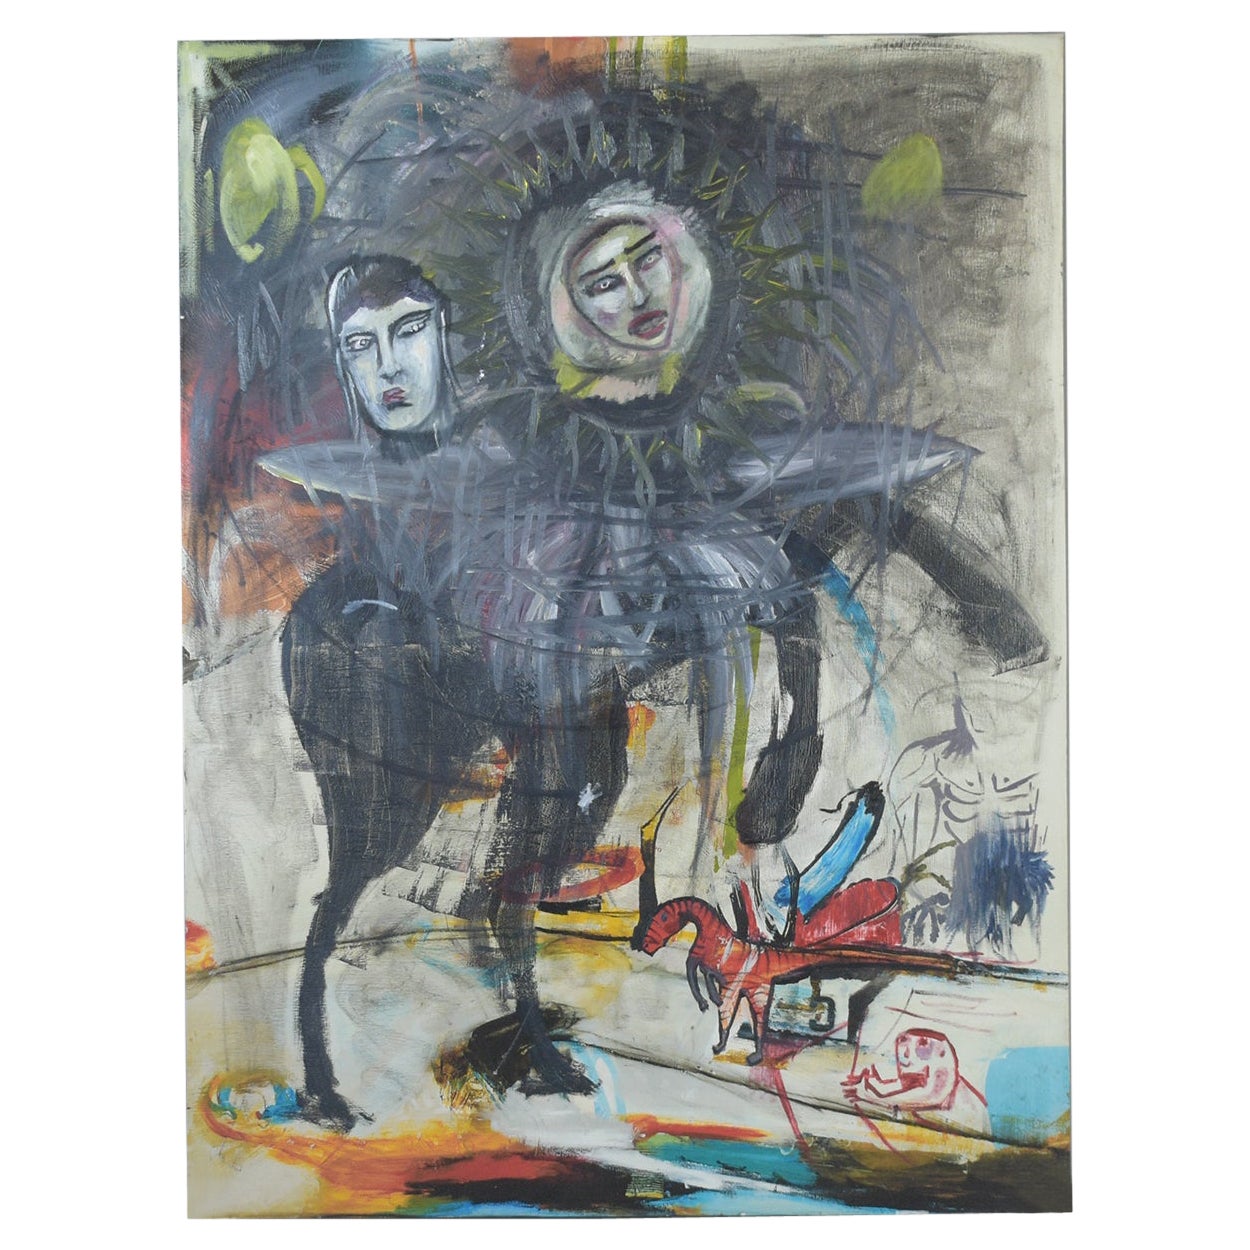 Unique Two-Headed Horse Abstract Expressionist Painting